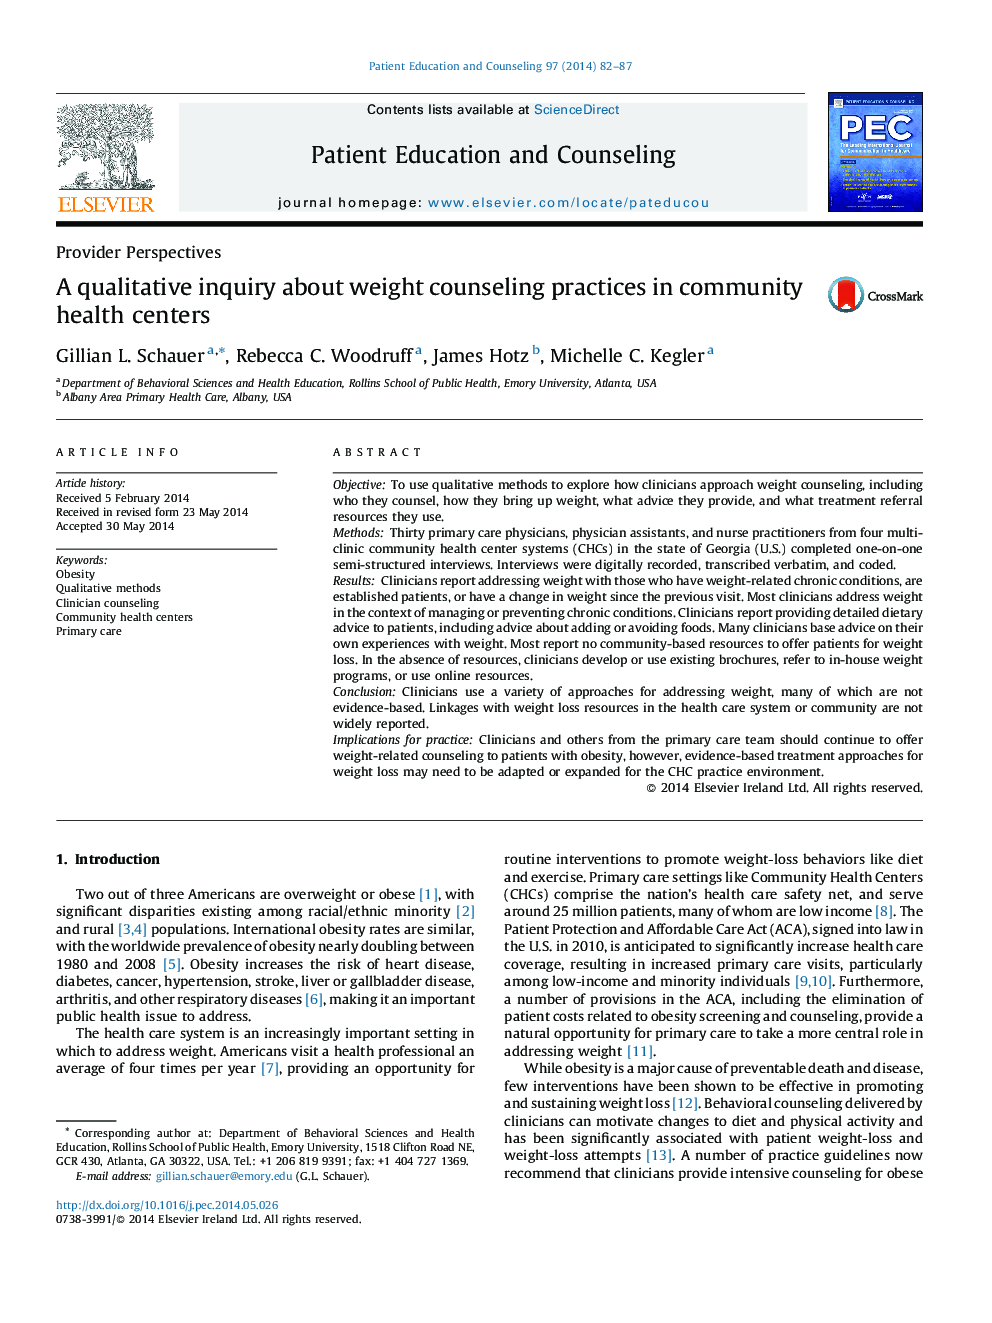 A qualitative inquiry about weight counseling practices in community health centers